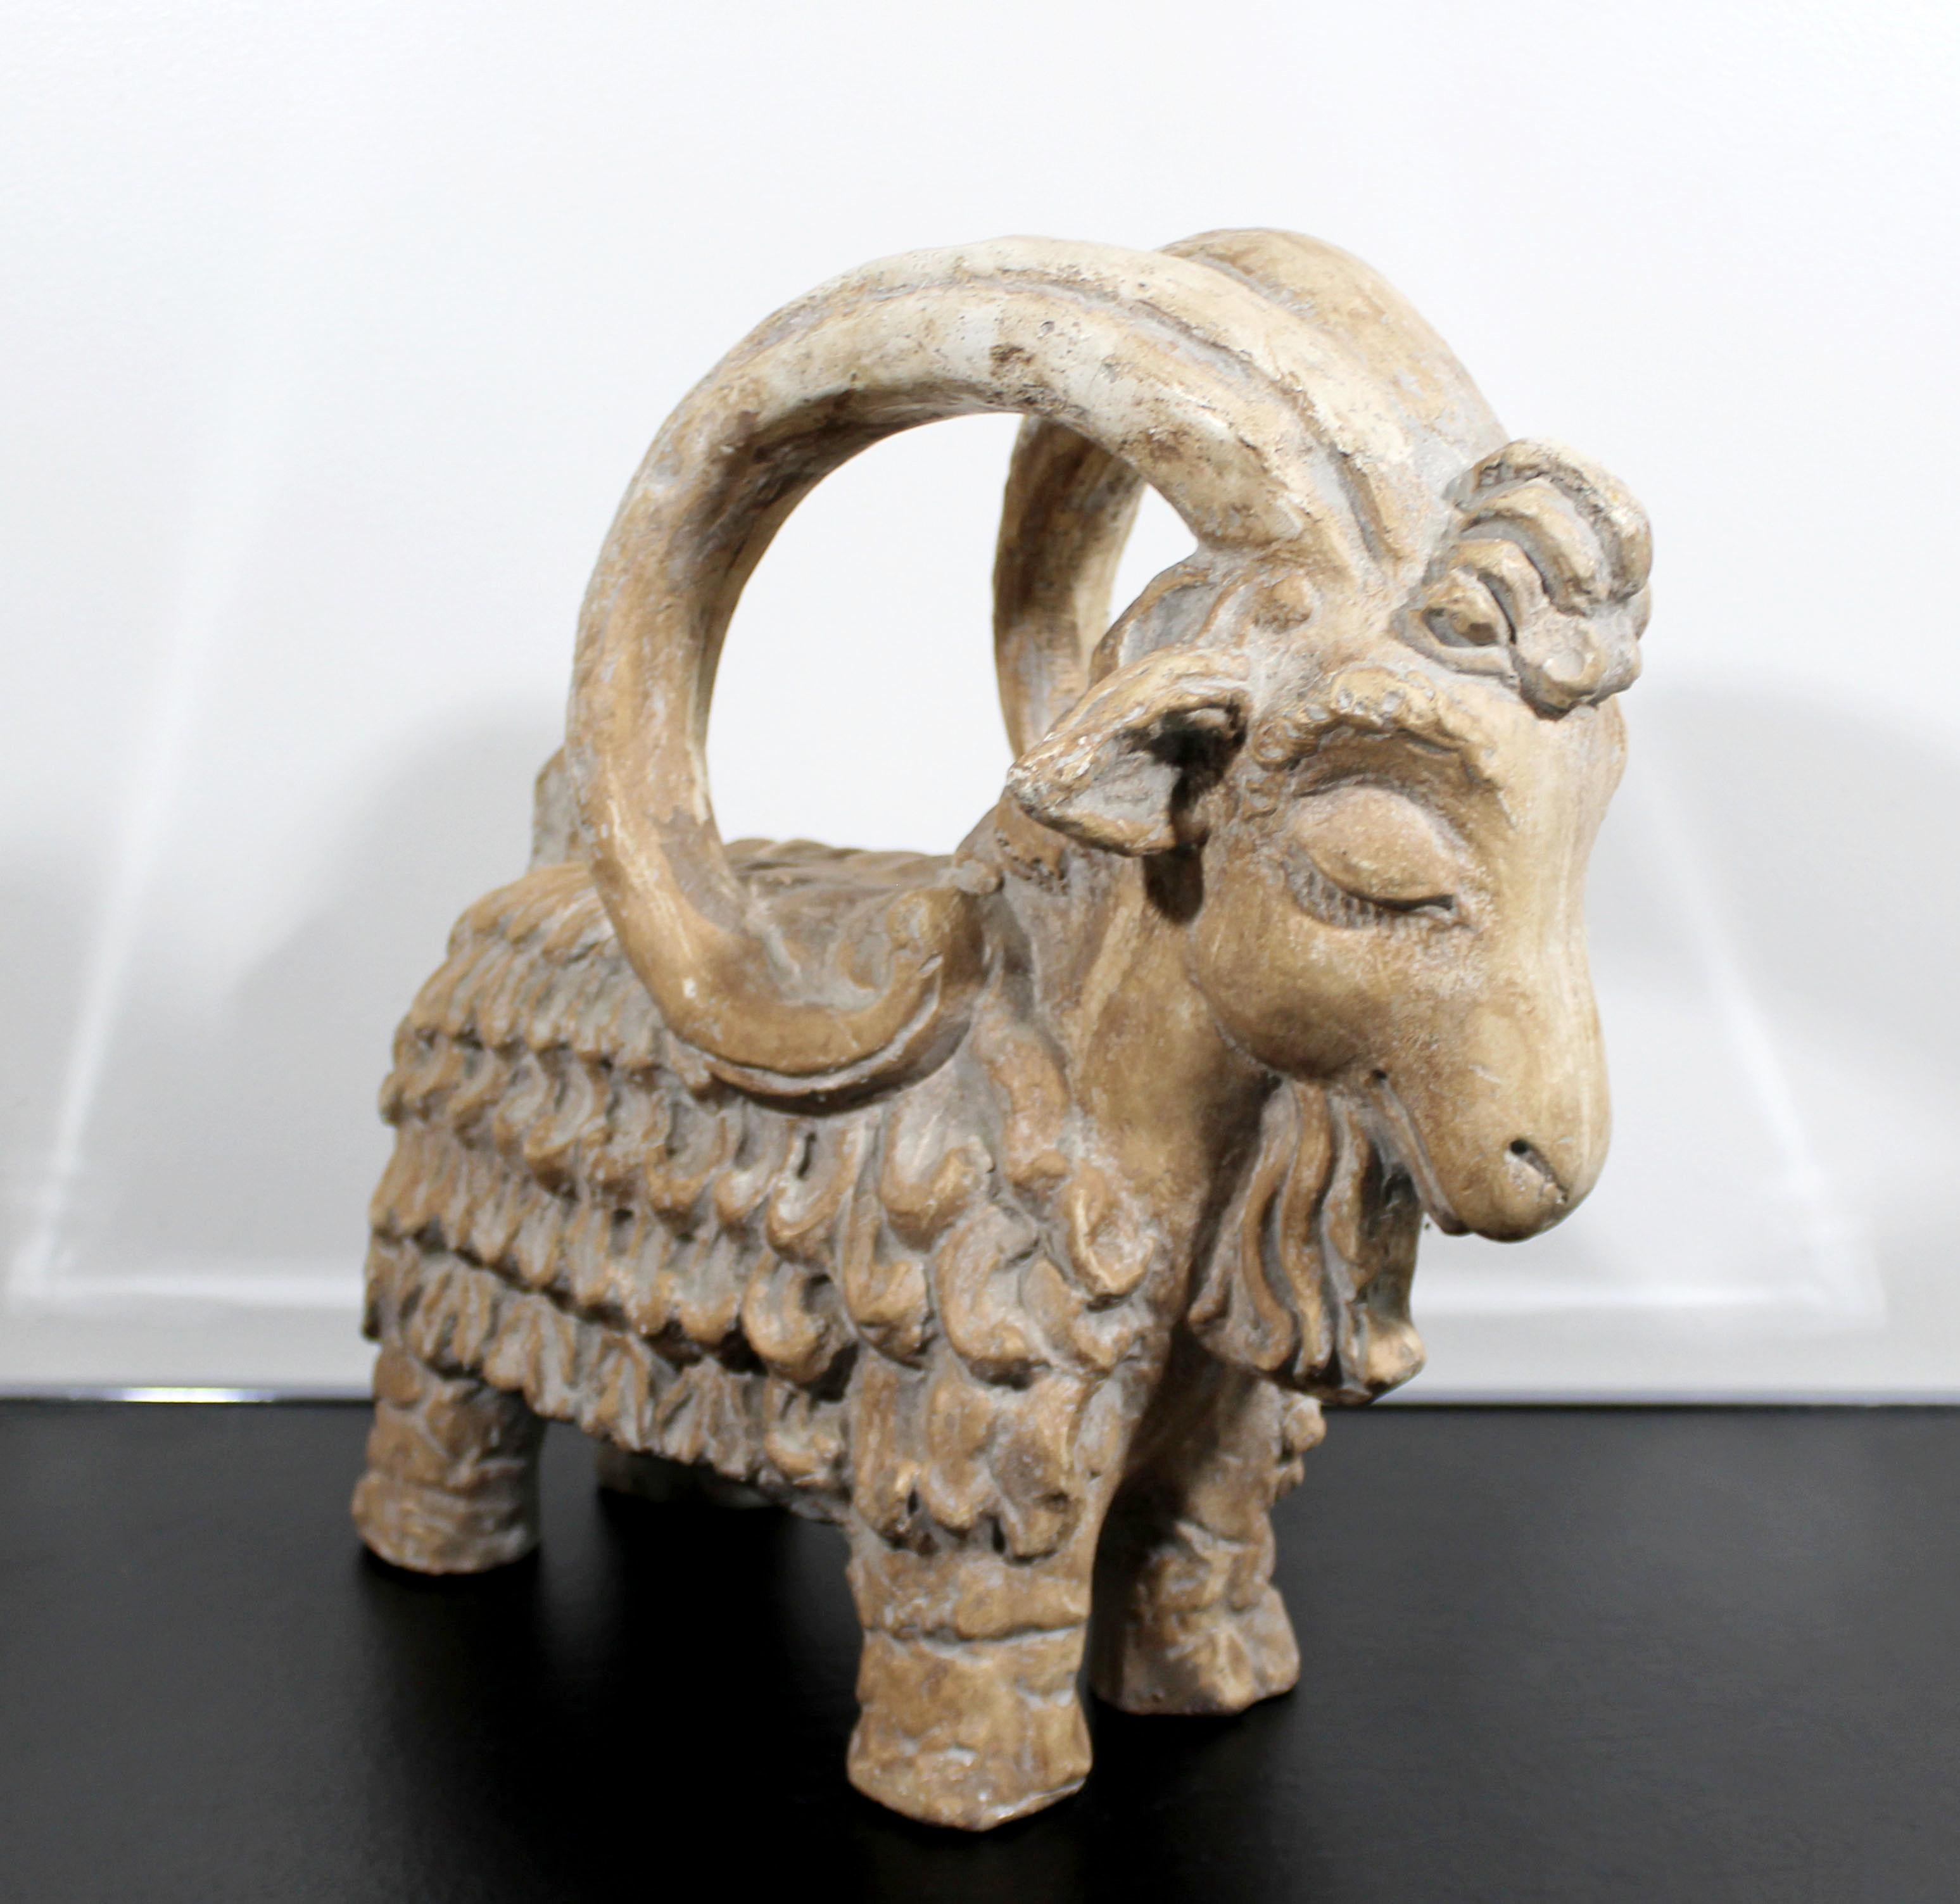 For your consideration is a gorgeous Aries ram table sculpture, signed by Austin Productions and dated 1971. In excellent vintage condition. The dimensions are 15